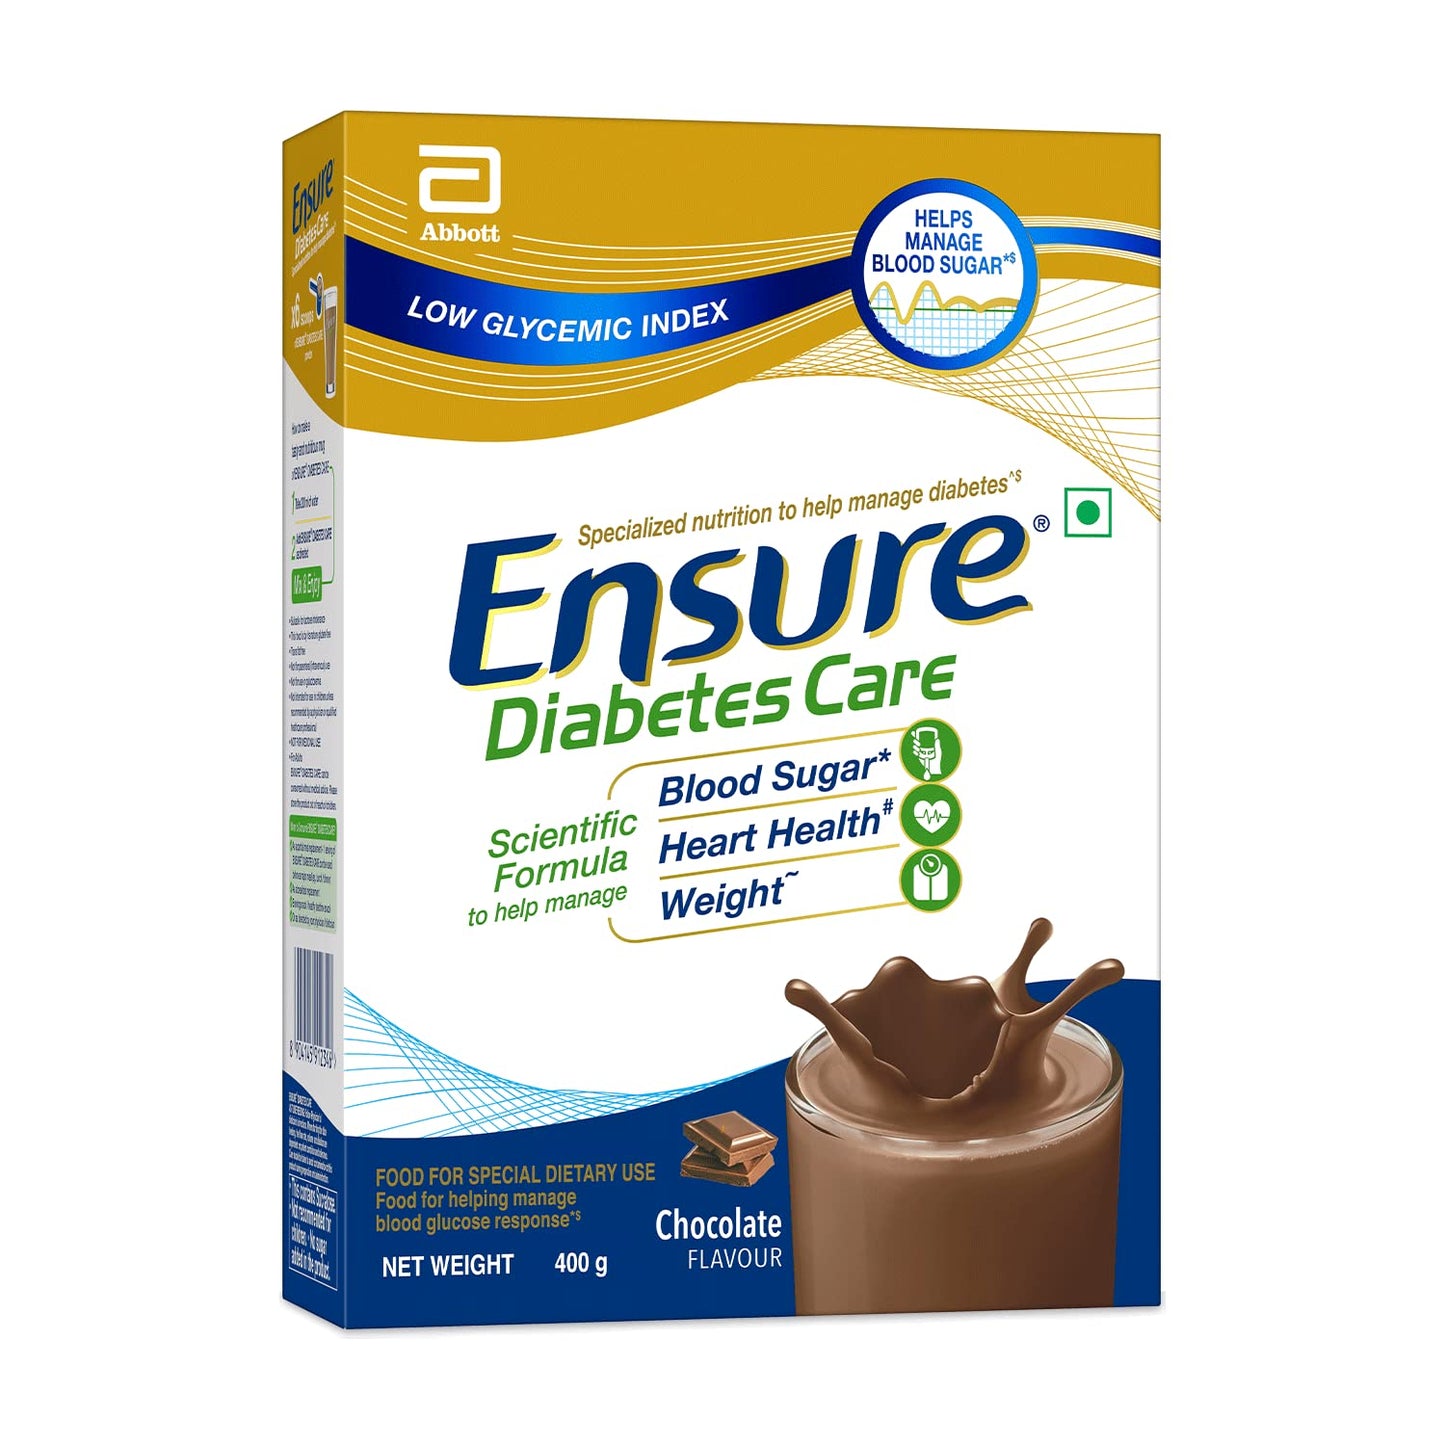 Bsure Dutch Chocolate Flavour, 400gm – ClickOnCare